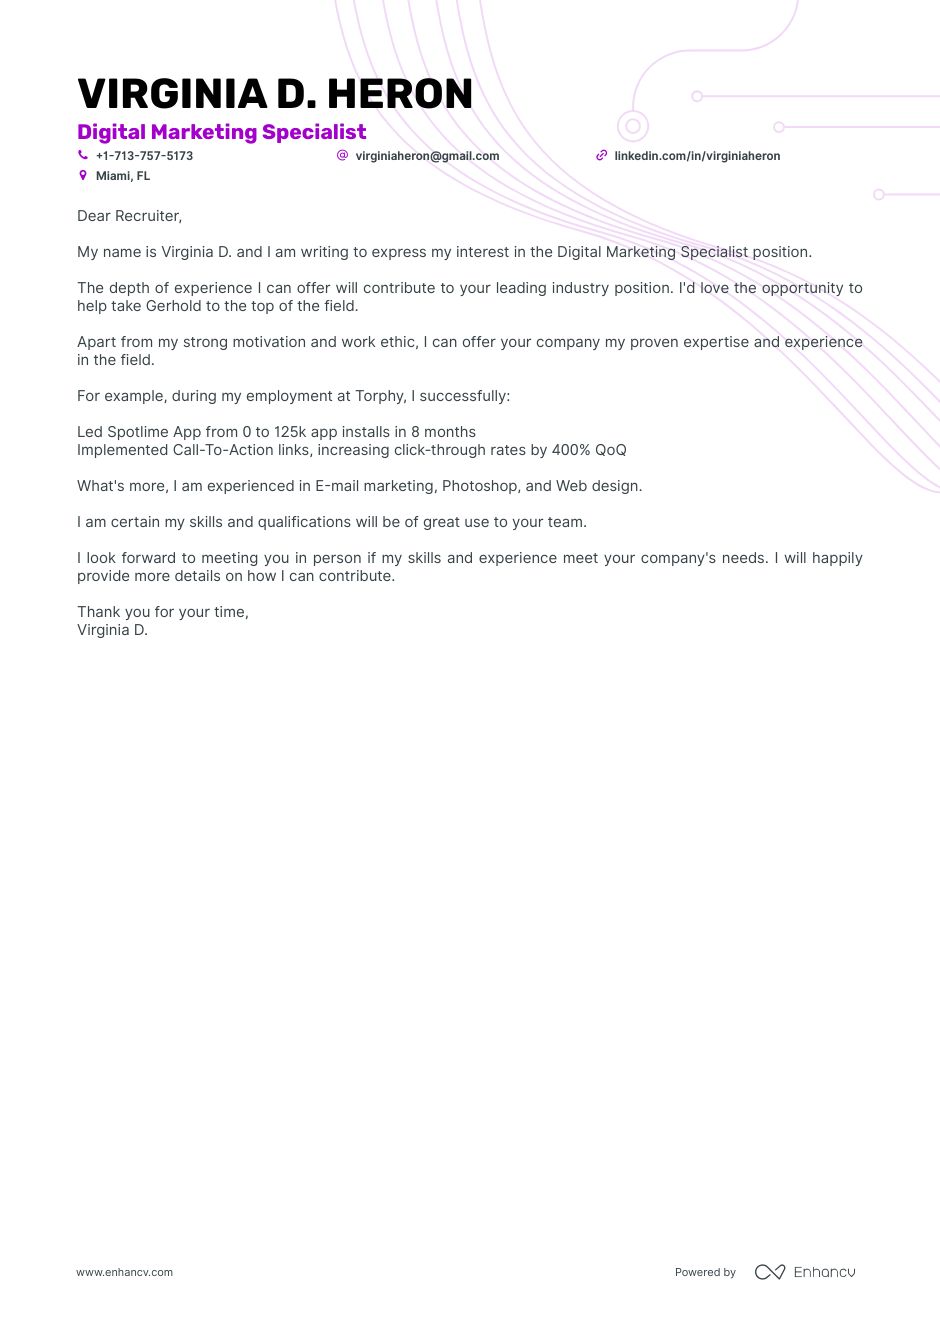 digital-marketing-specialist-coverletter.png